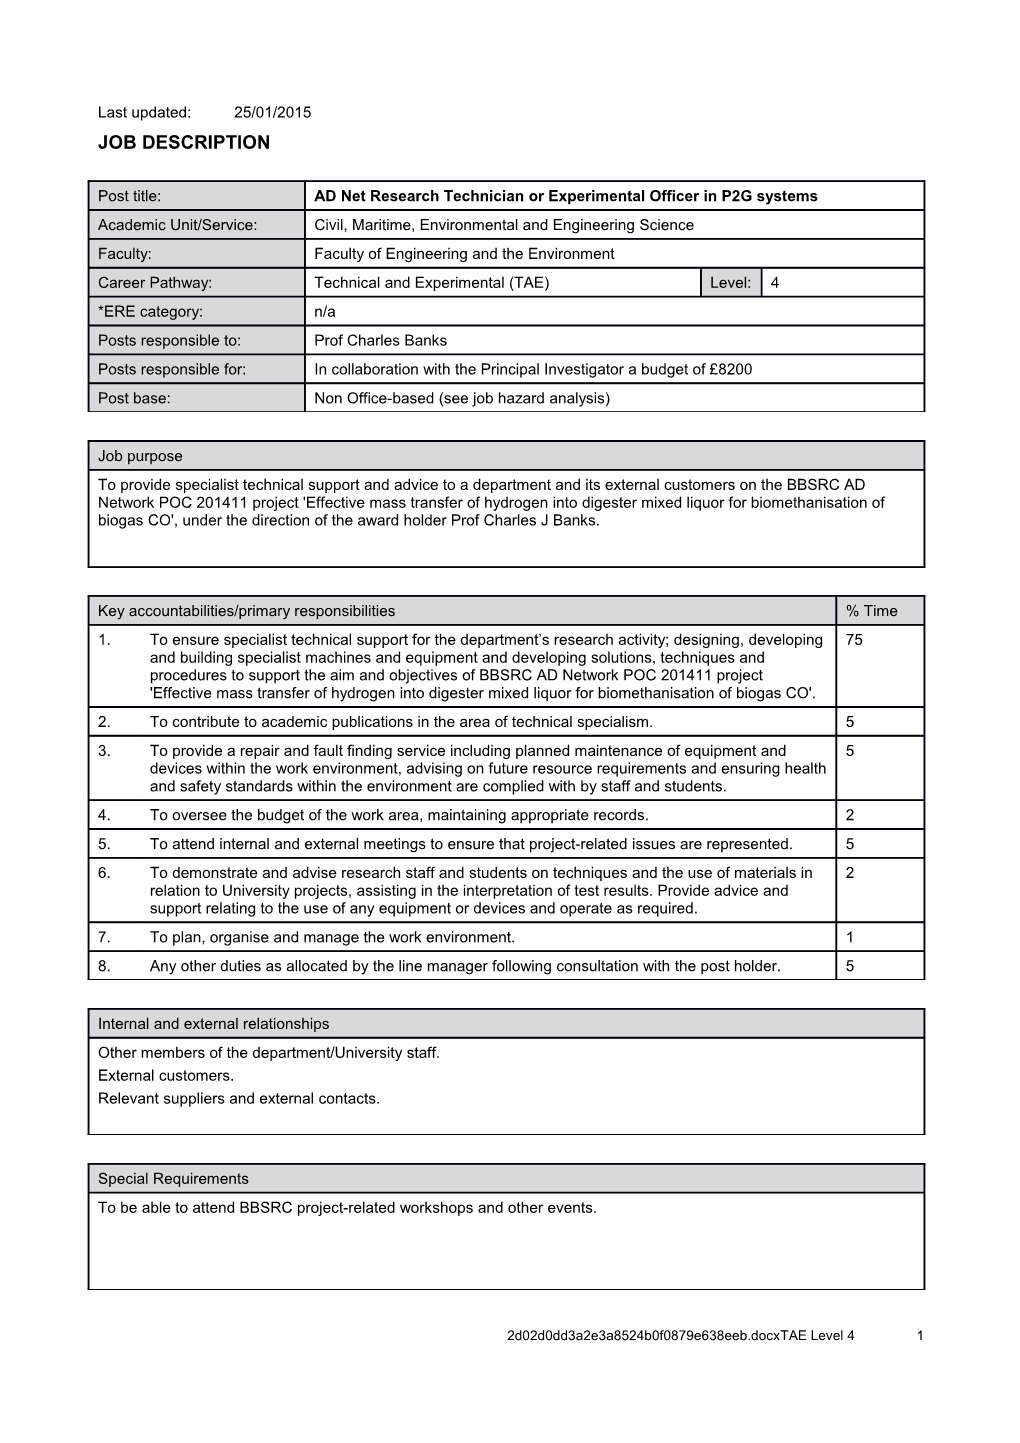 Person Specification s9